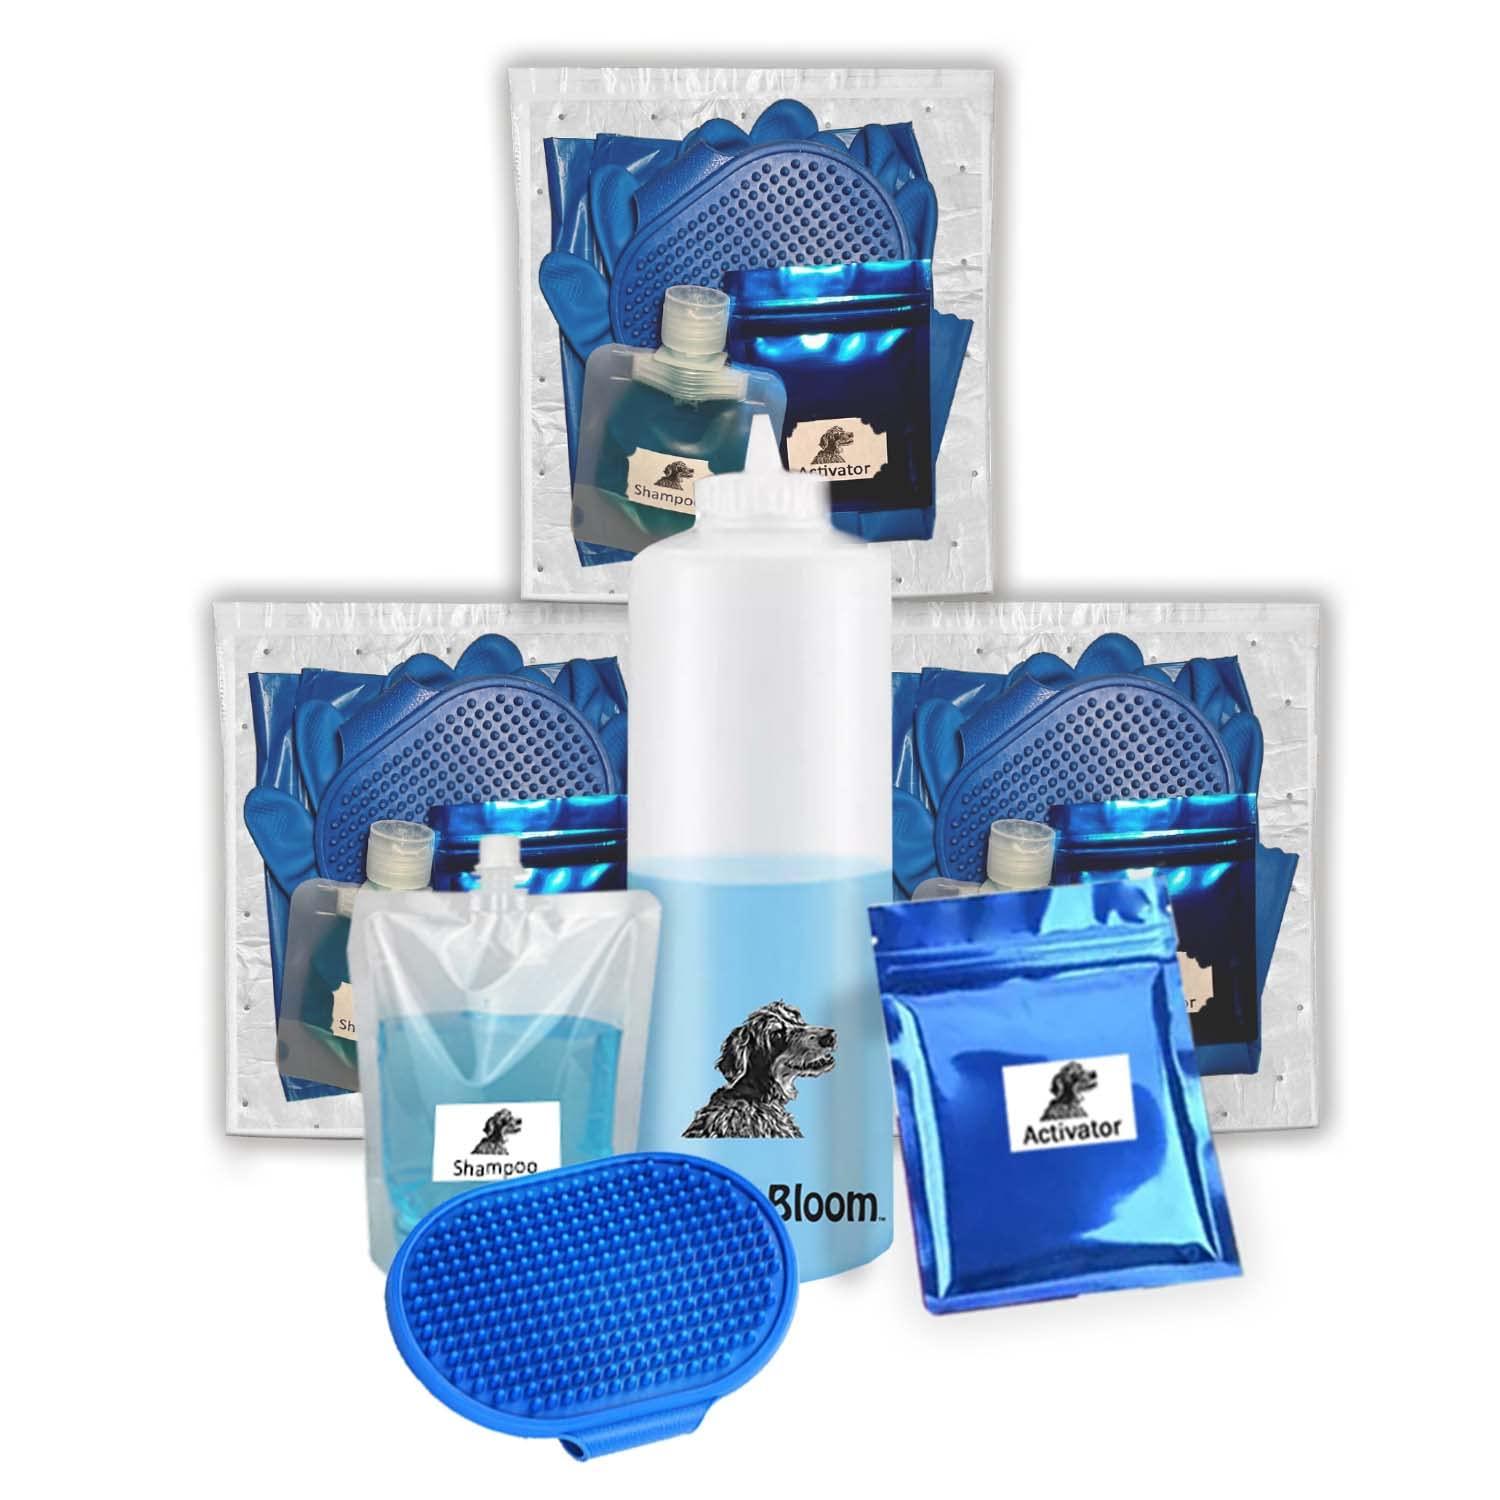 Benny\\\'s Best Skunk and Odor Removal Eliminator for Dogs, Cats, Pets - 3 kits - Perfect for new pet owner gift